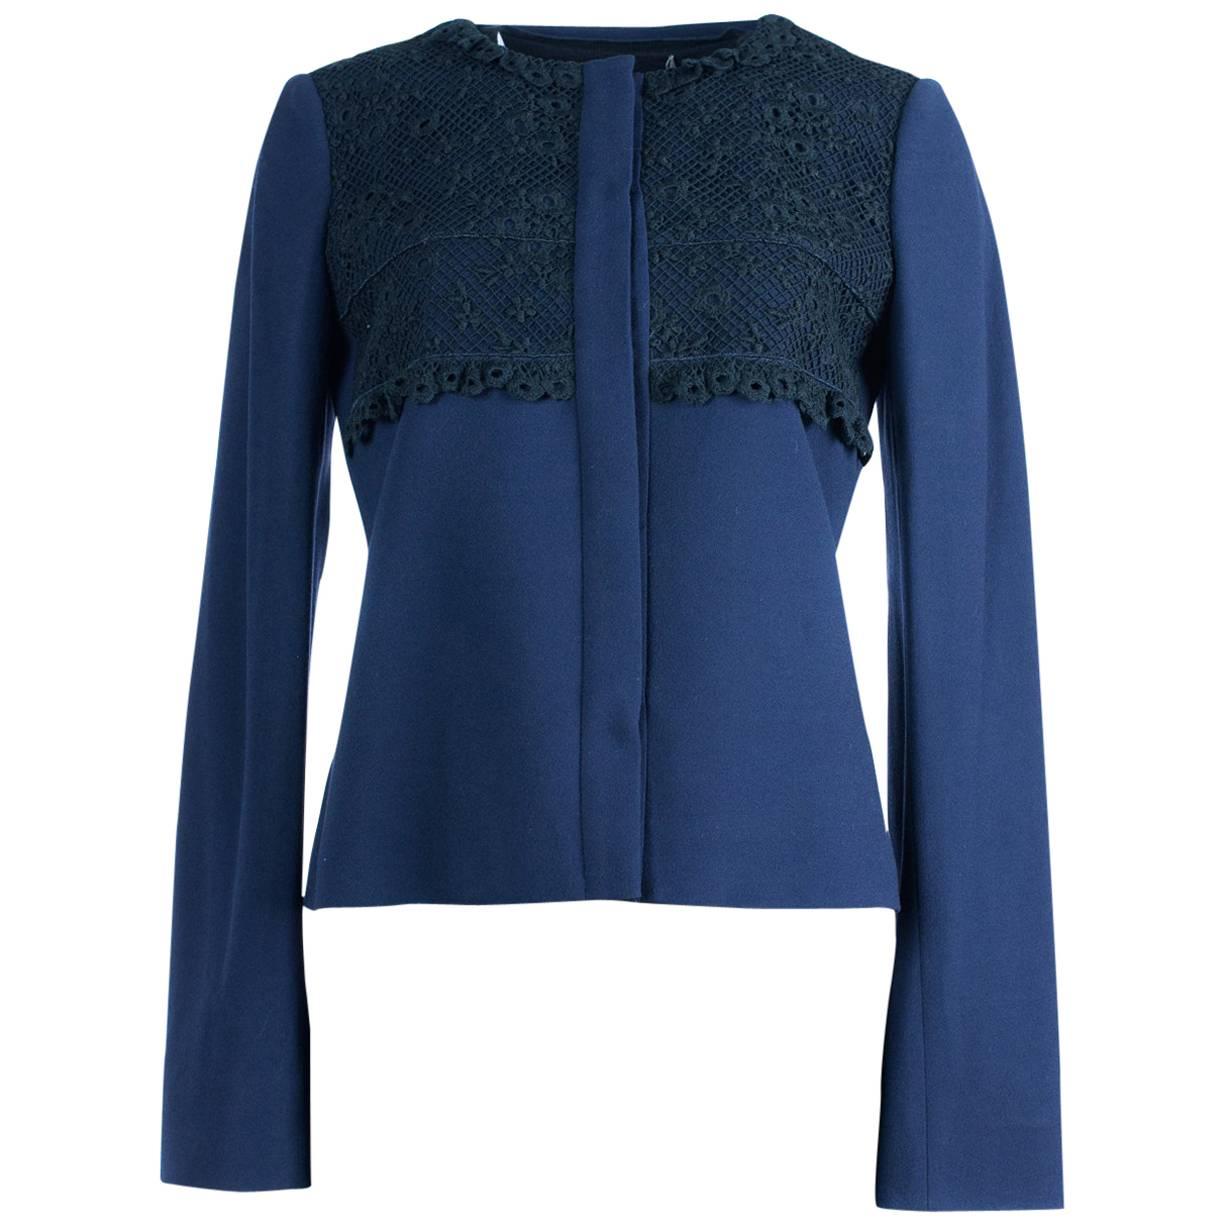 Valentino Women's Navy Lace Accented Snap Jacket For Sale